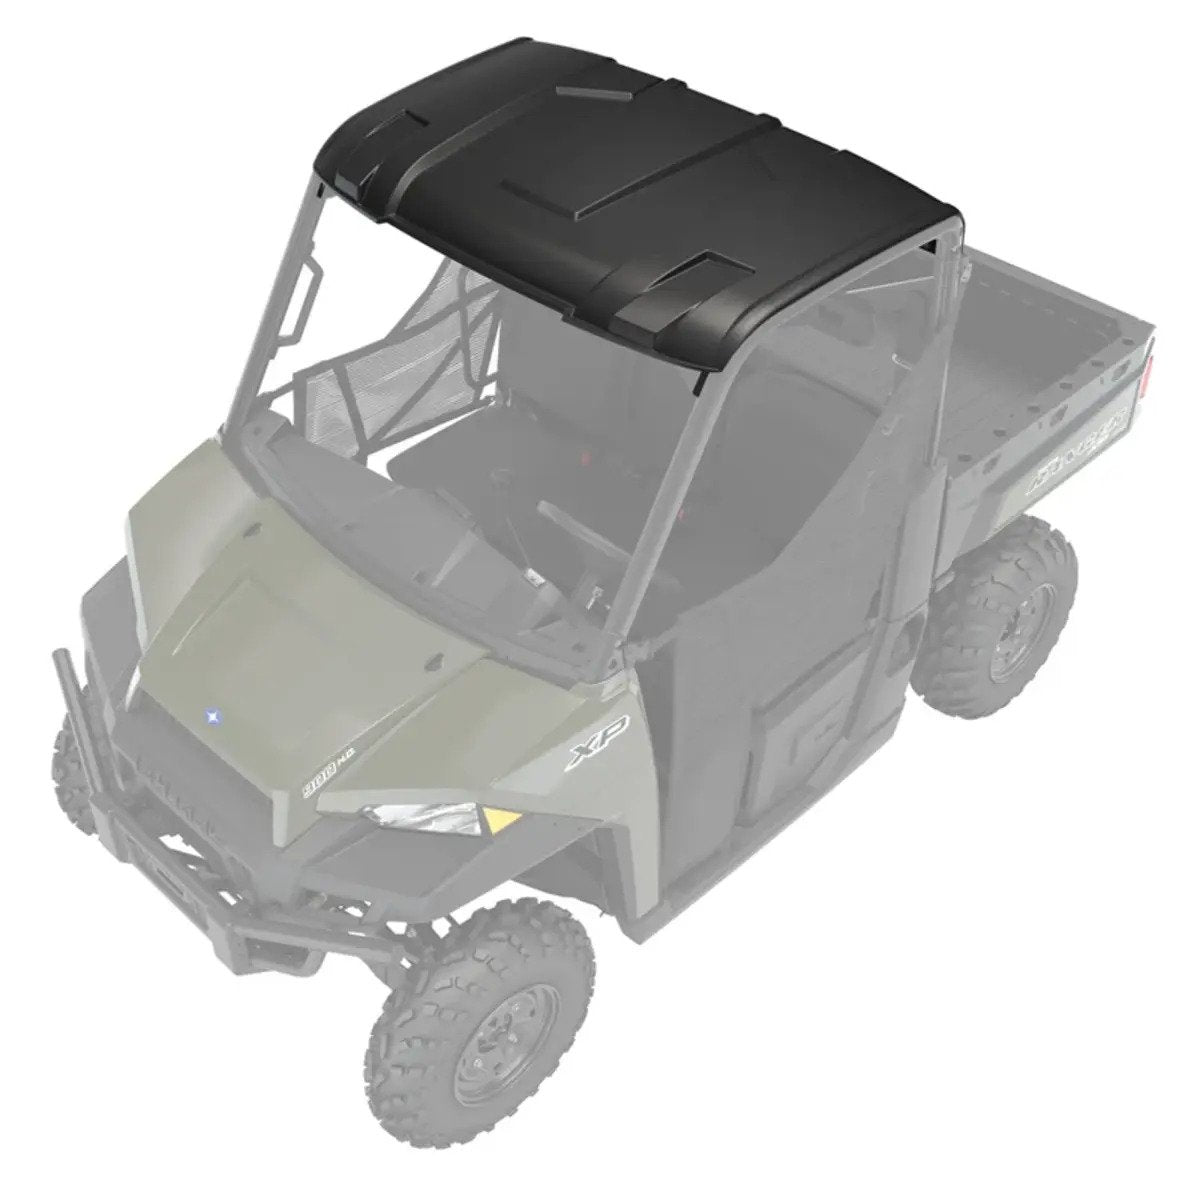 Polaris Ranger Poly 3-Seat Premium Roof with Lock & Ride Technology with Liner